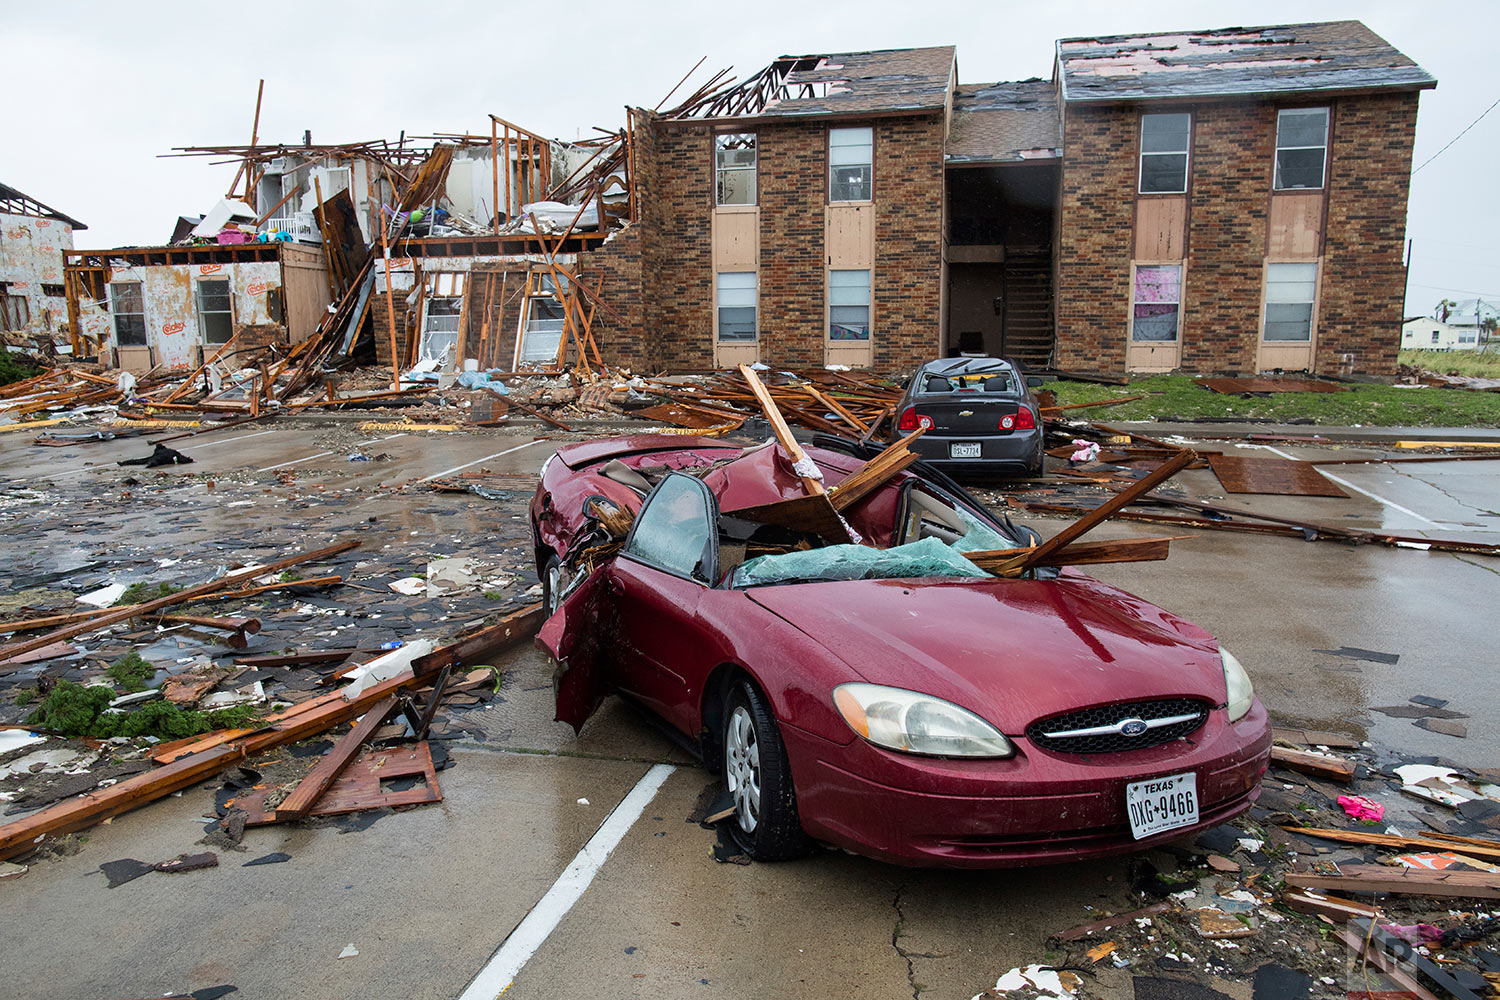 A damaged car sits outside a heavily damaged apartment complex in Rockport, Texas, after Hurricane Harvey struck the area, Saturday, Aug. 26, 2017. (Courtney Sacco/Corpus Christi Caller-Times via AP)